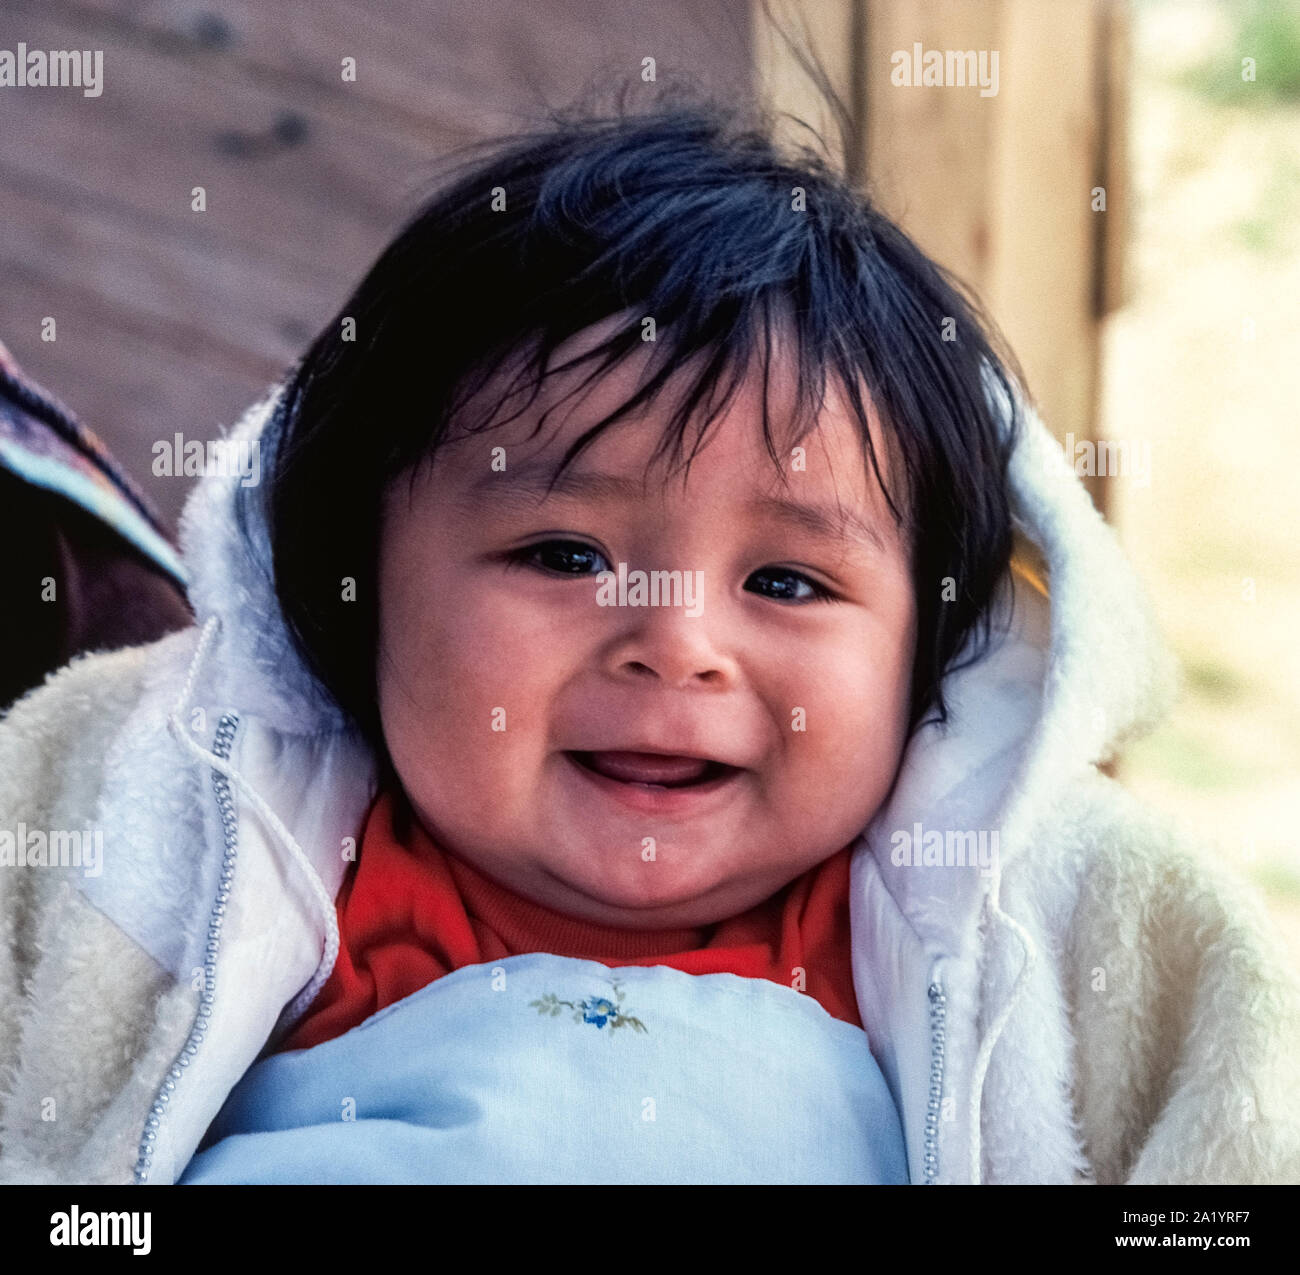 A smiling baby girl has the black hair and dark brown eyes that help  identify her as a Navajo Indian, one of the Native American peoples that  live in the Southwestern United